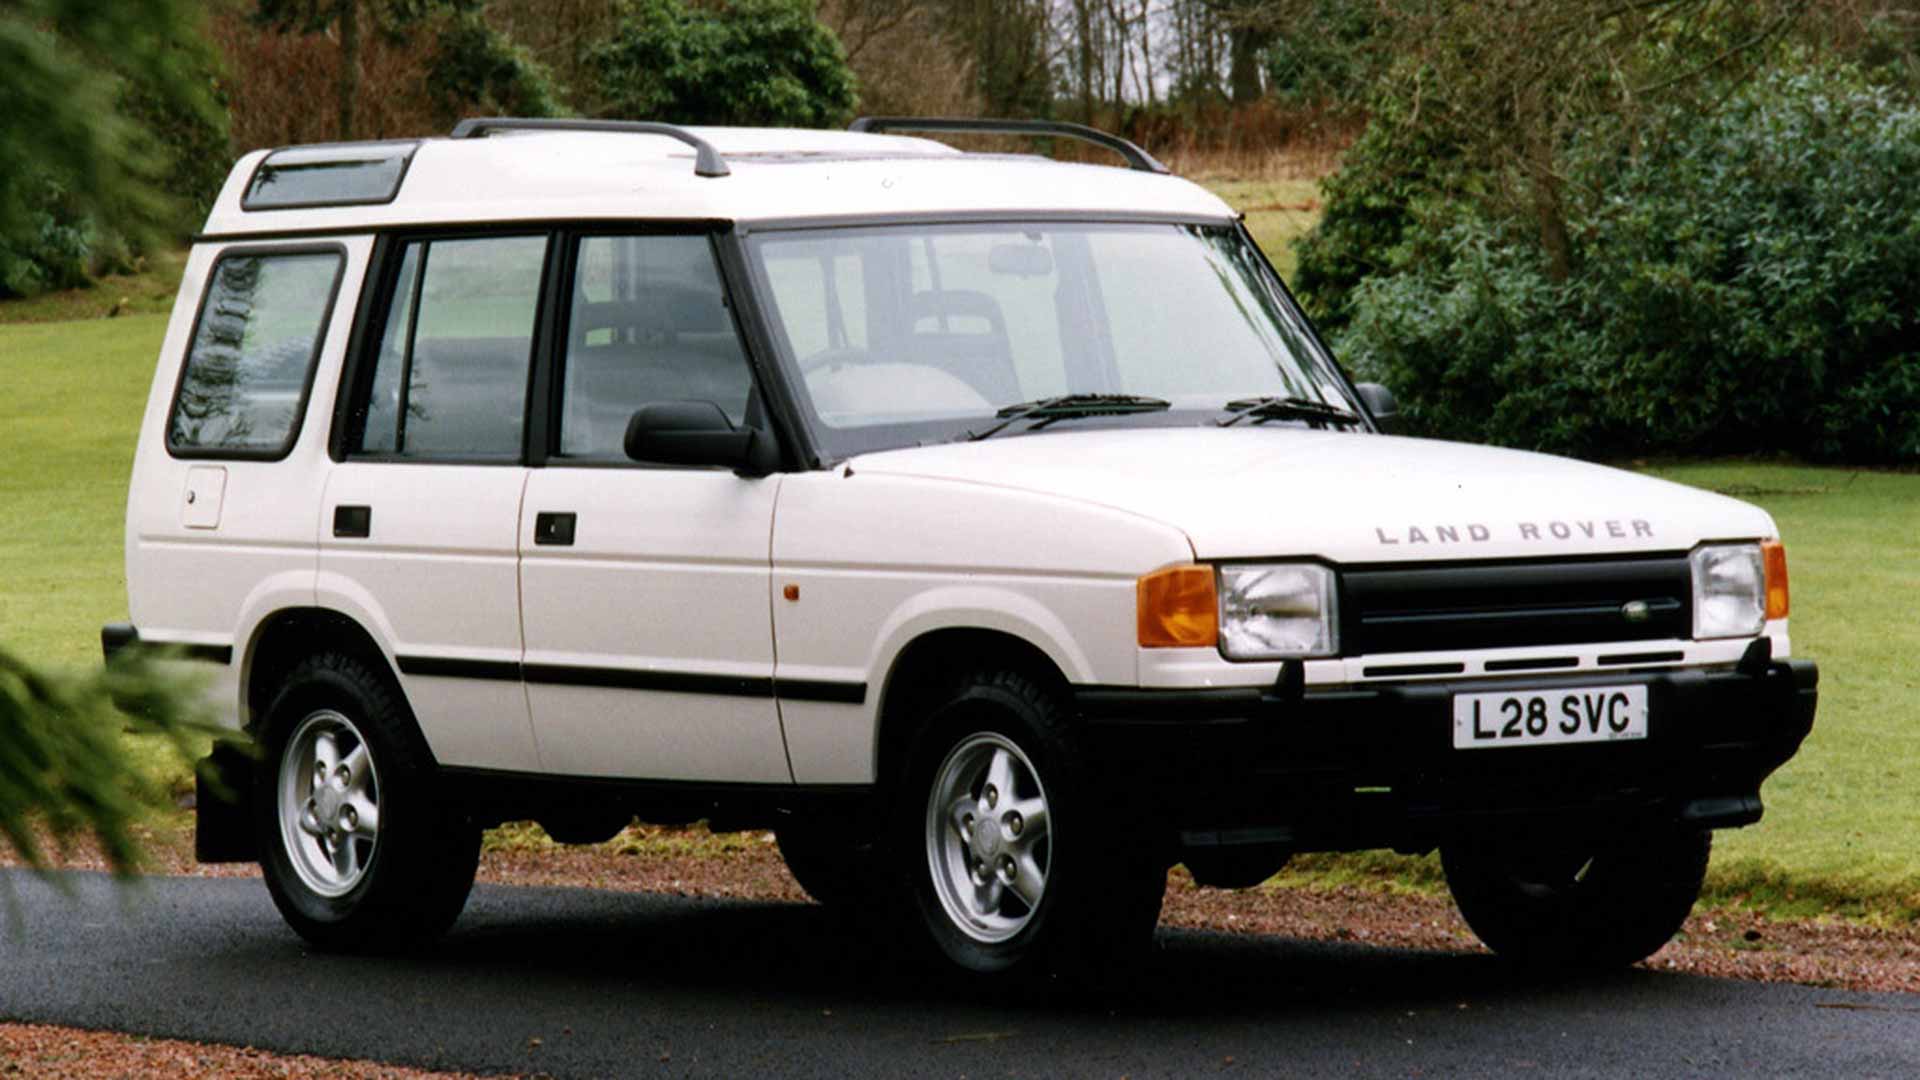 First discovery. Ленд Ровер Дискавери 1. Ленд Ровер Дискавери 1989. Land Rover Discovery 1989. Land Rover Discovery 1 1989.